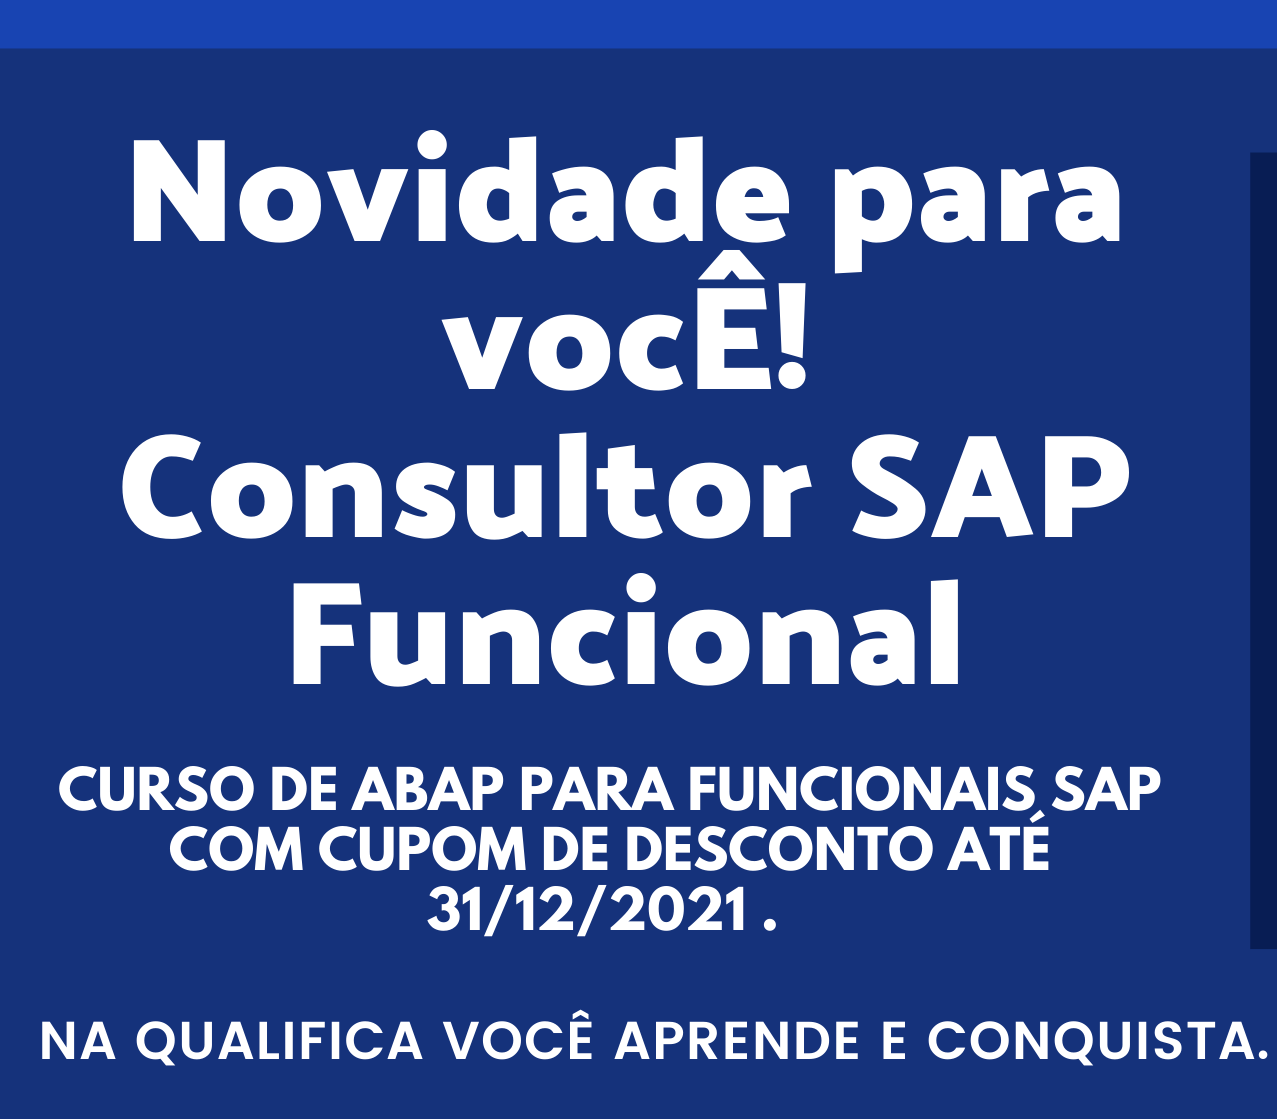 qualifica-rh-it-recruiting-outsourcing-consulting-1-aspect-ratio-365-320